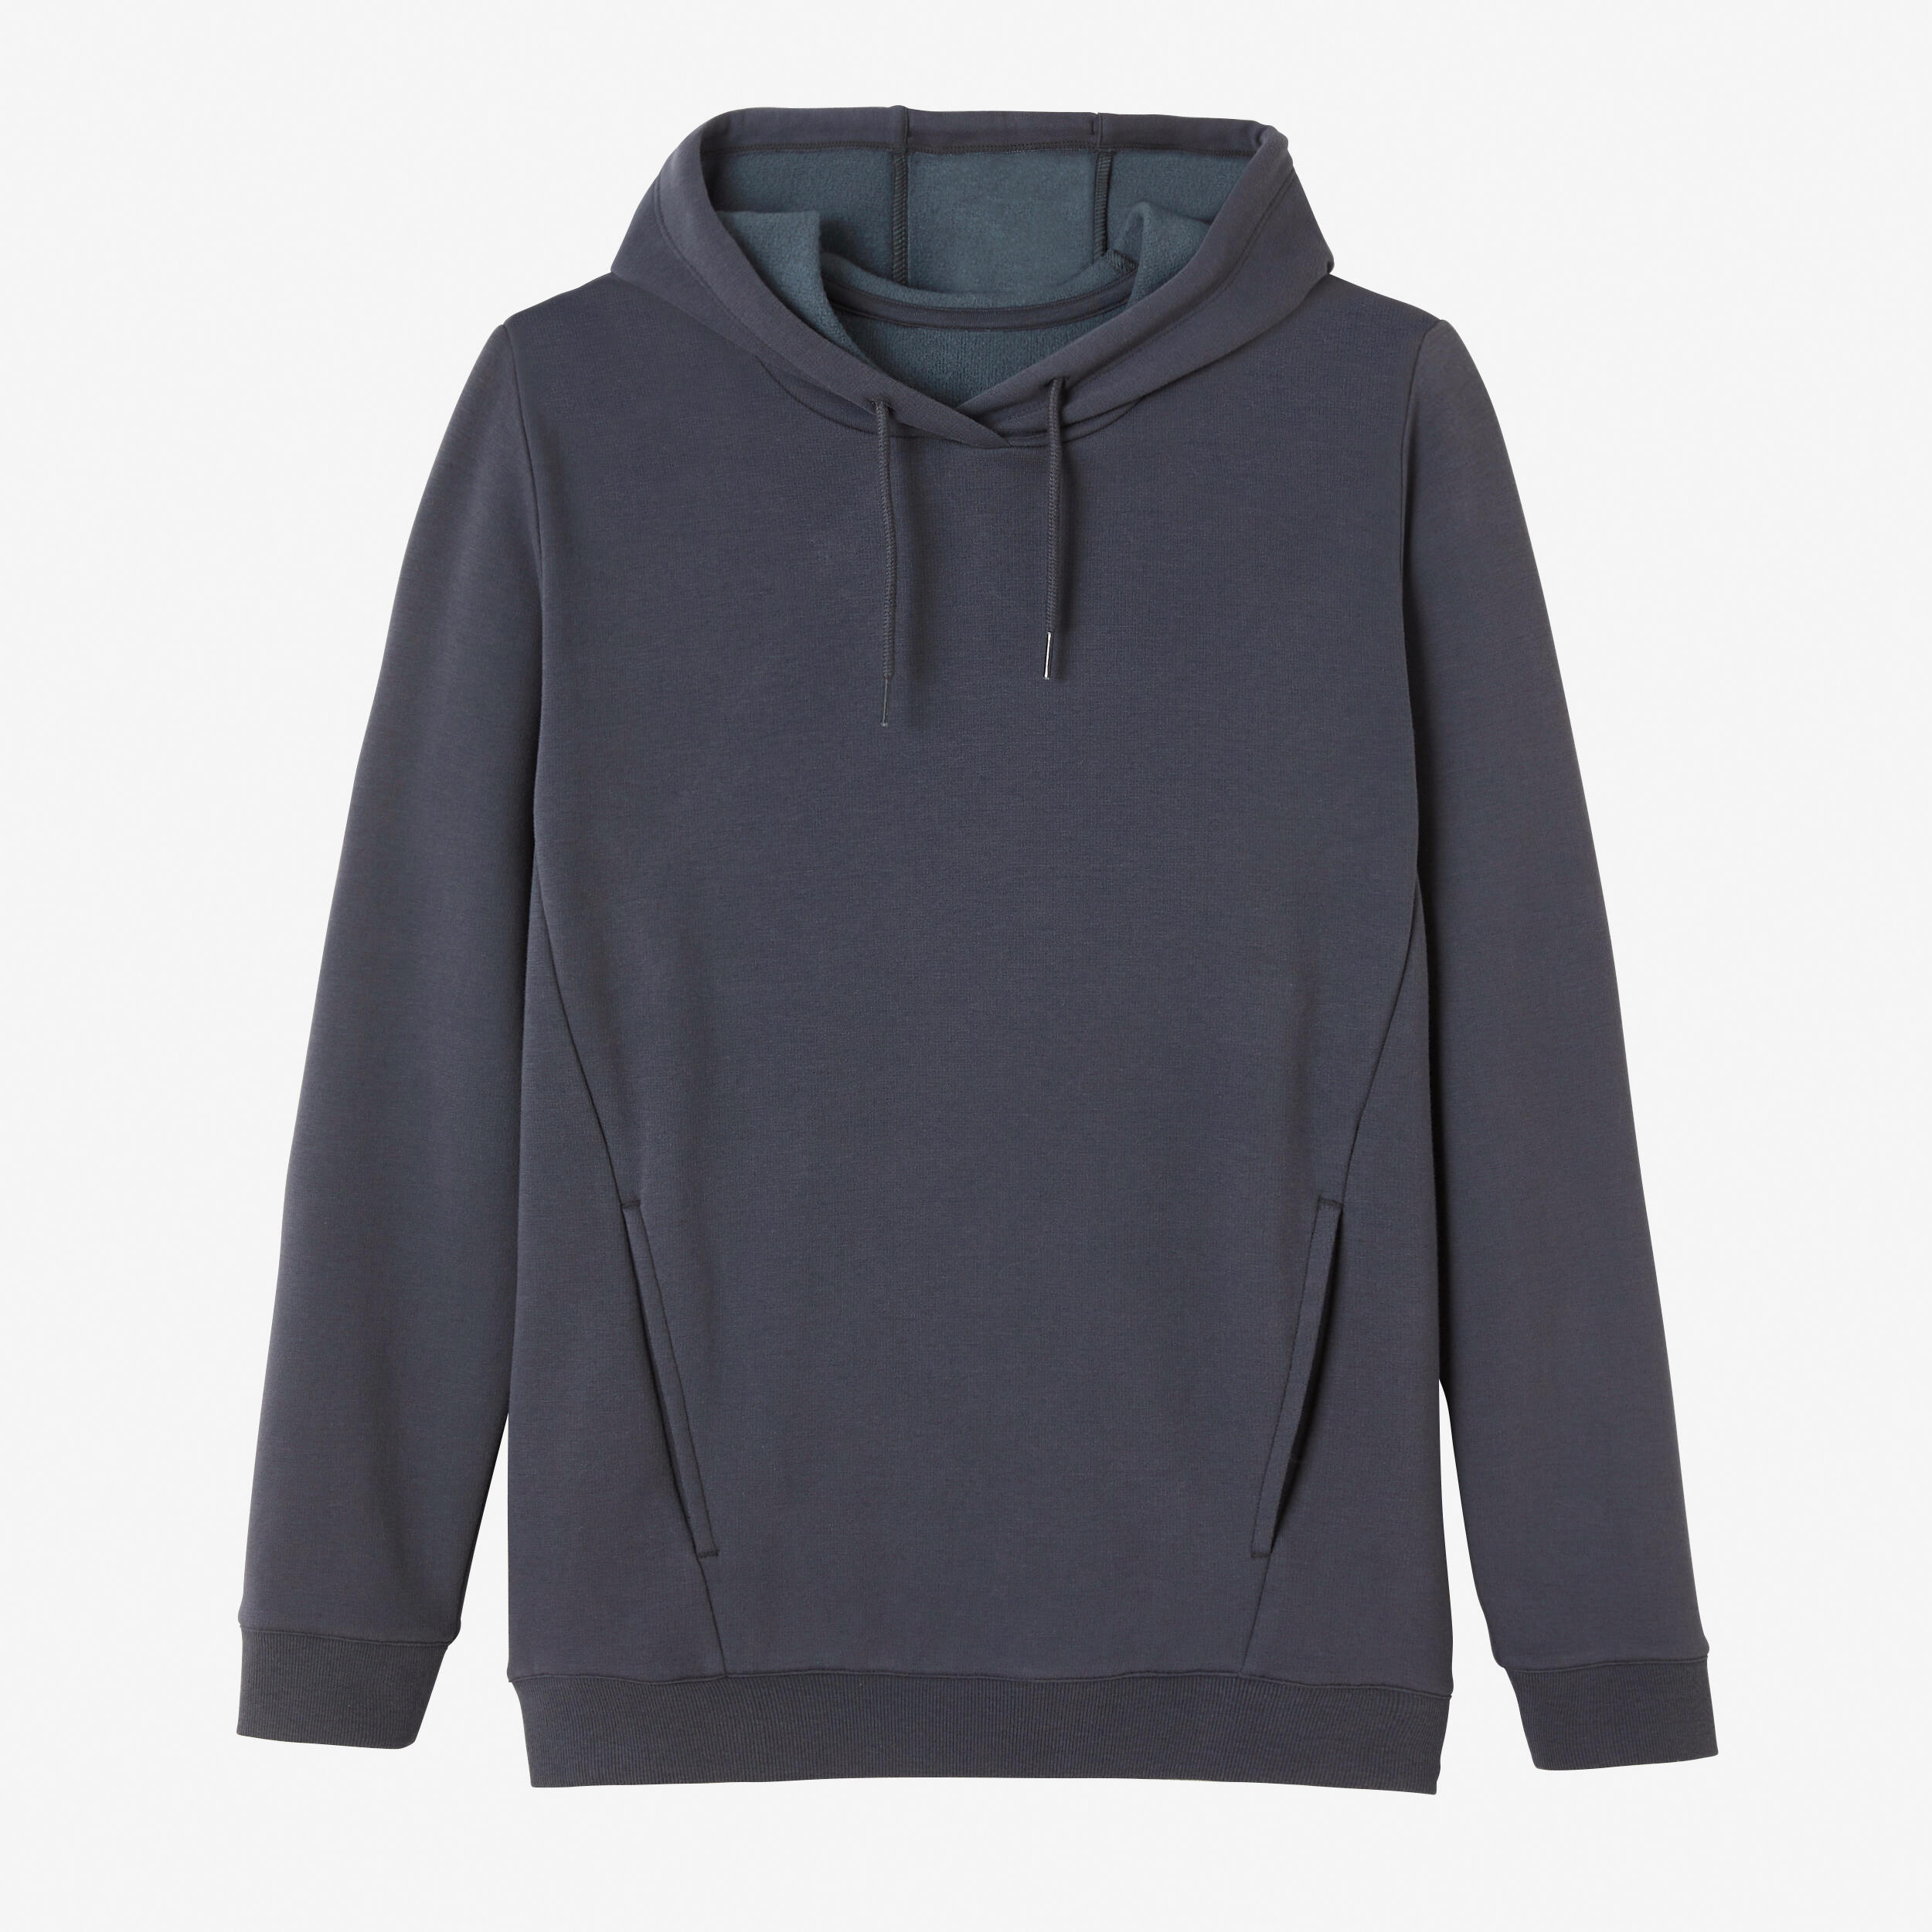 Women's Fitness Hoodie 520 - Abyss Grey 6/6